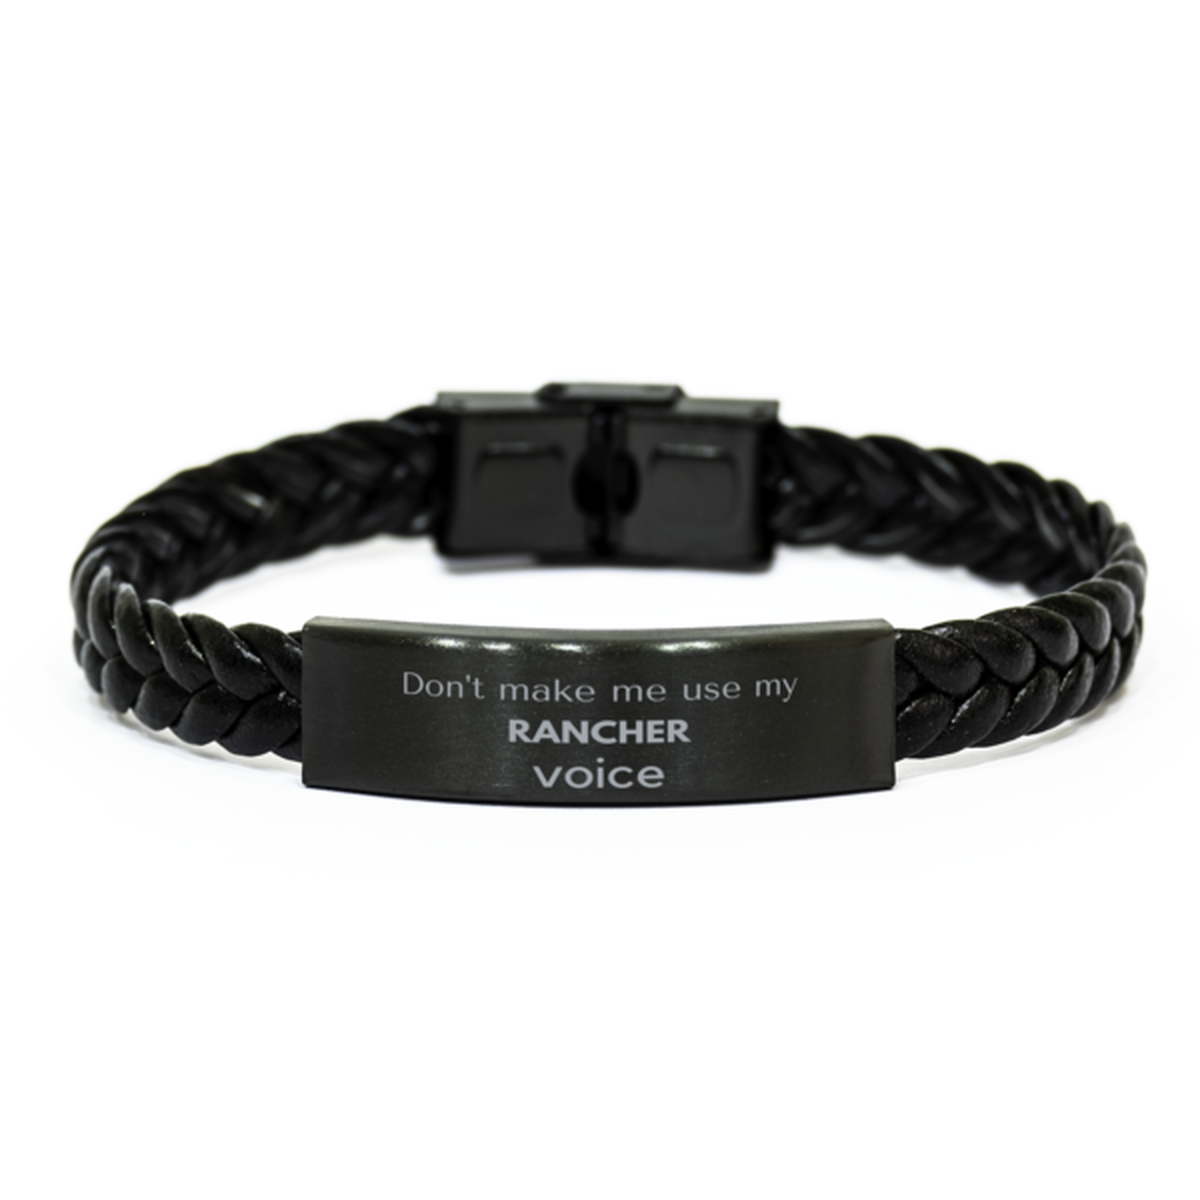 Don't make me use my Rancher voice, Sarcasm Rancher Gifts, Christmas Rancher Braided Leather Bracelet Birthday Unique Gifts For Rancher Coworkers, Men, Women, Colleague, Friends